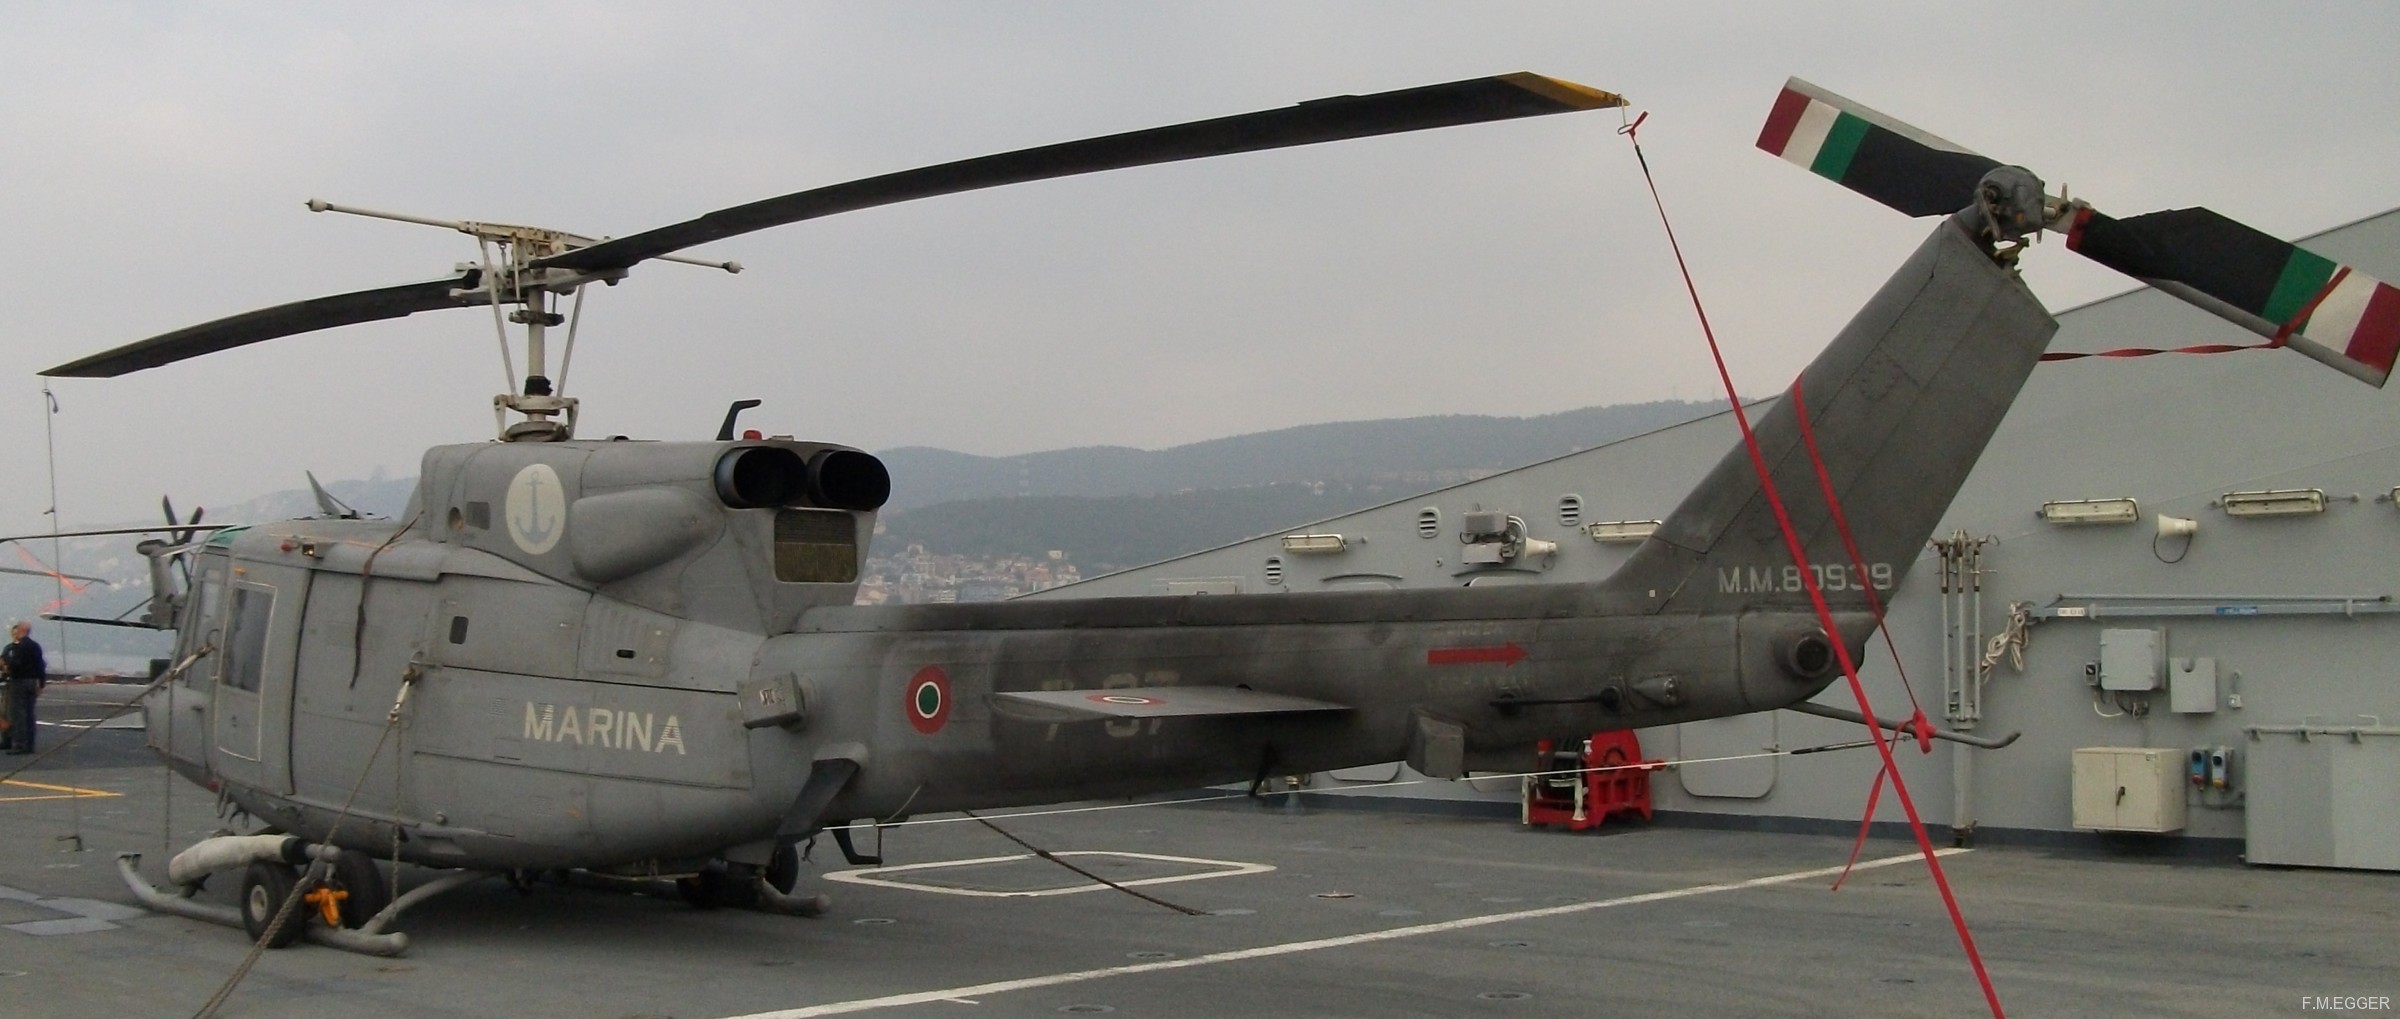 c-550 cavour aircraft carrier italian navy marina militare agusta bell ab-212 helicopter 58